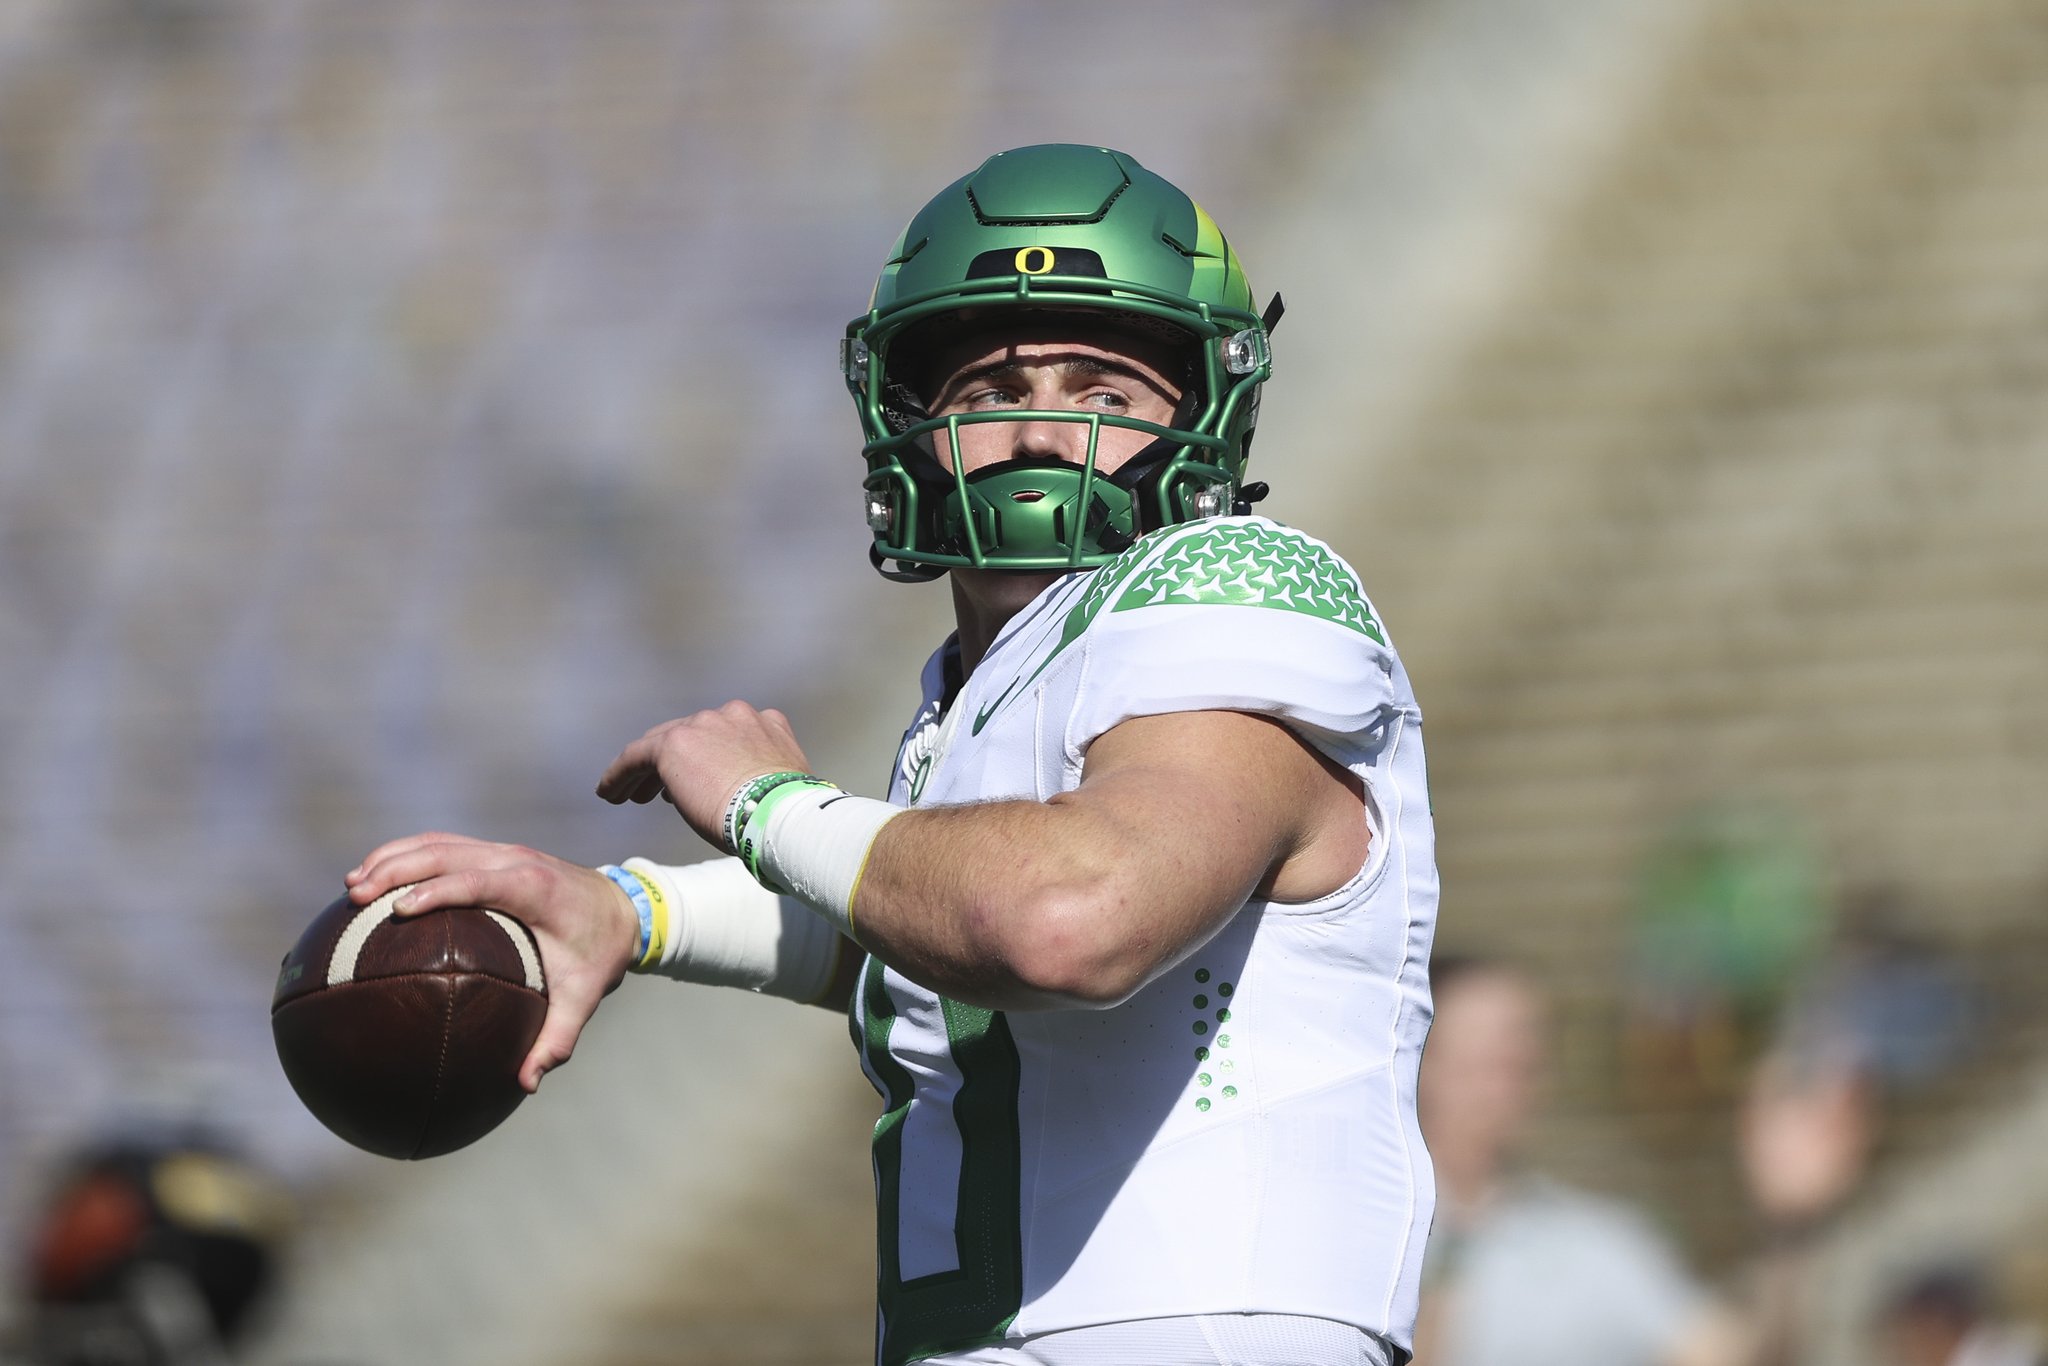 The Bo Nix experience will continue at Oregon for one more season. In a